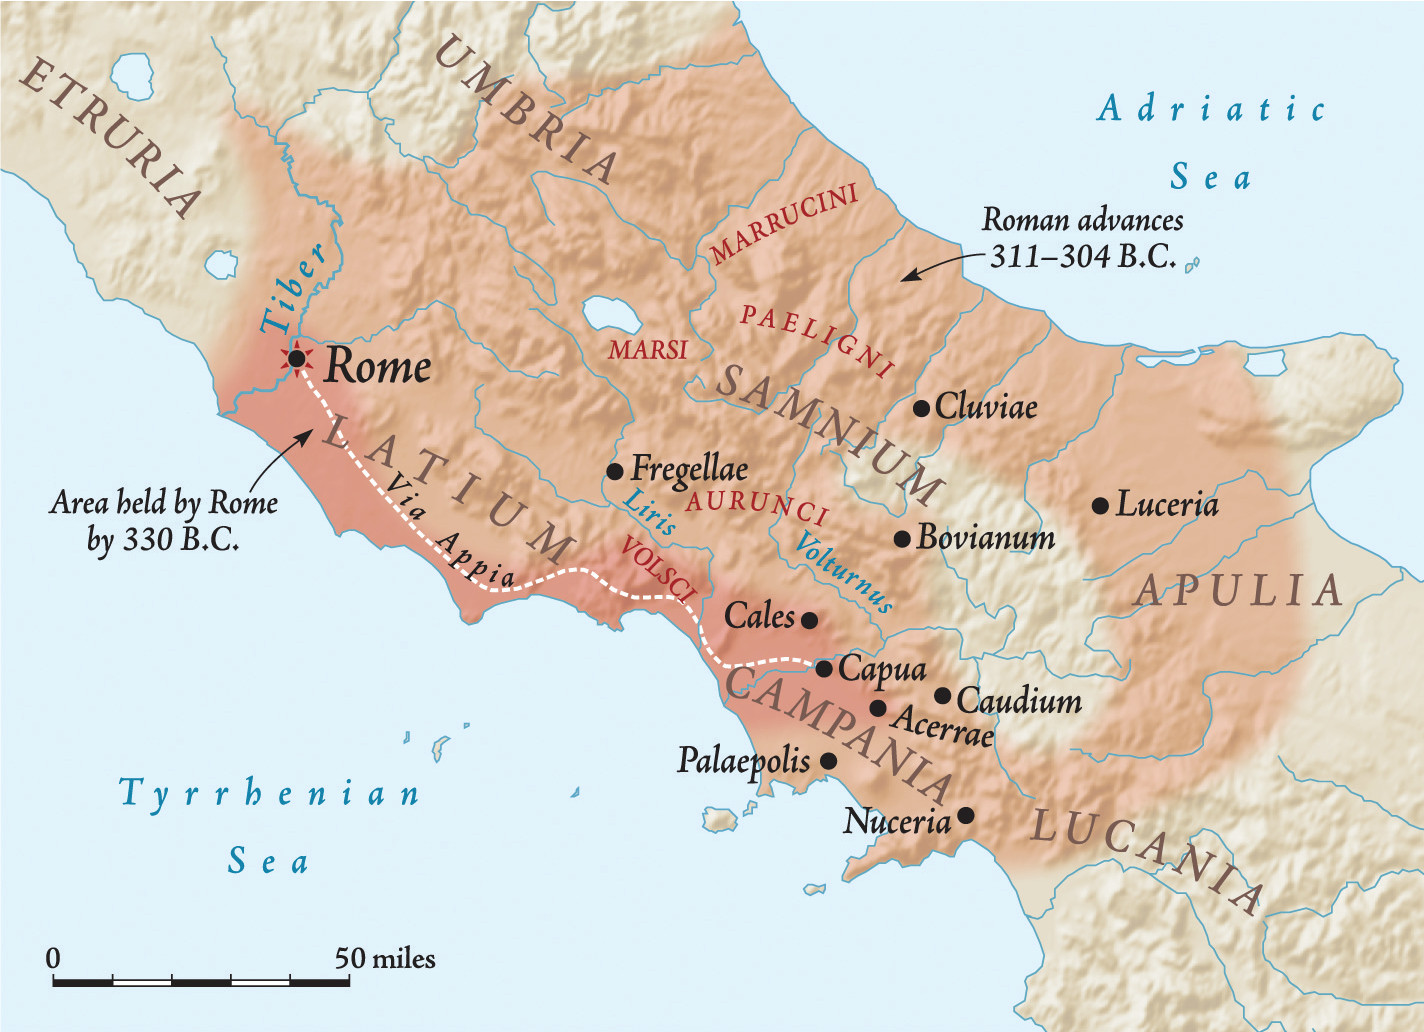 Roman victories in Latium allowed them to launch devastating raids into the Samnium heartland, capturing Bovianum and enforcing a peace settlement in 304 bc.